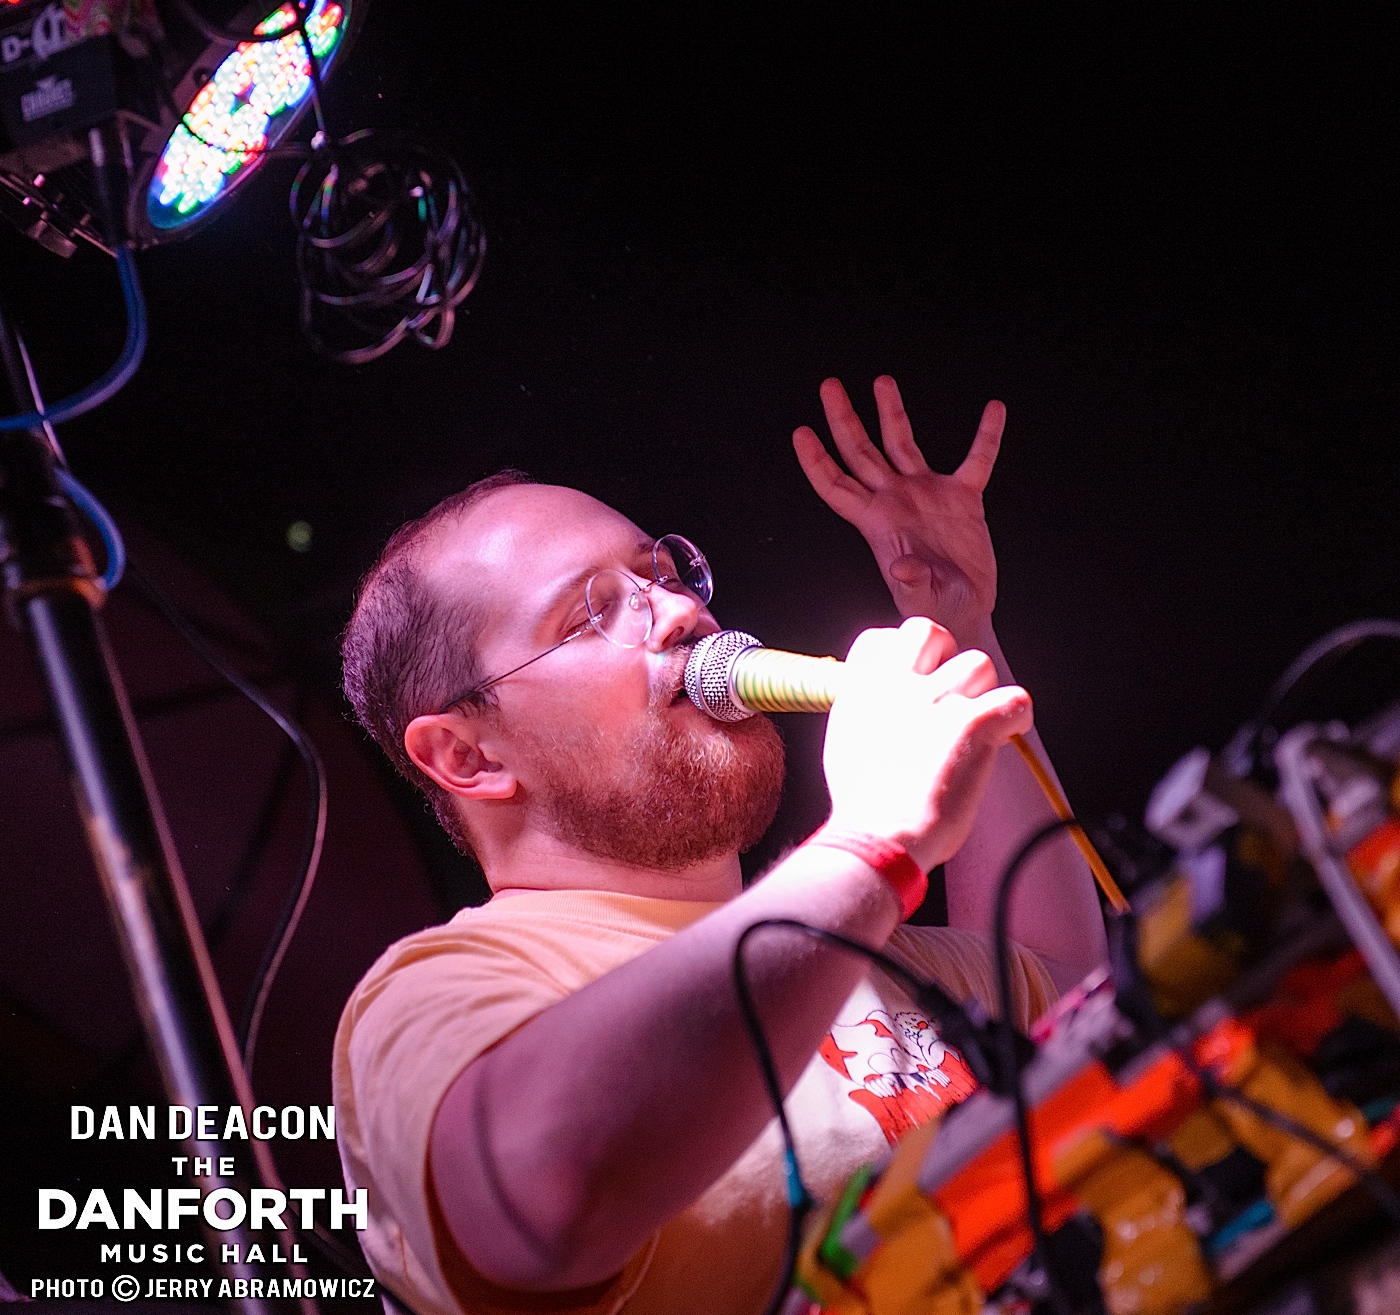 DAN DEACON opens for Animal Collective at The Danforth Music Hall Toronto.